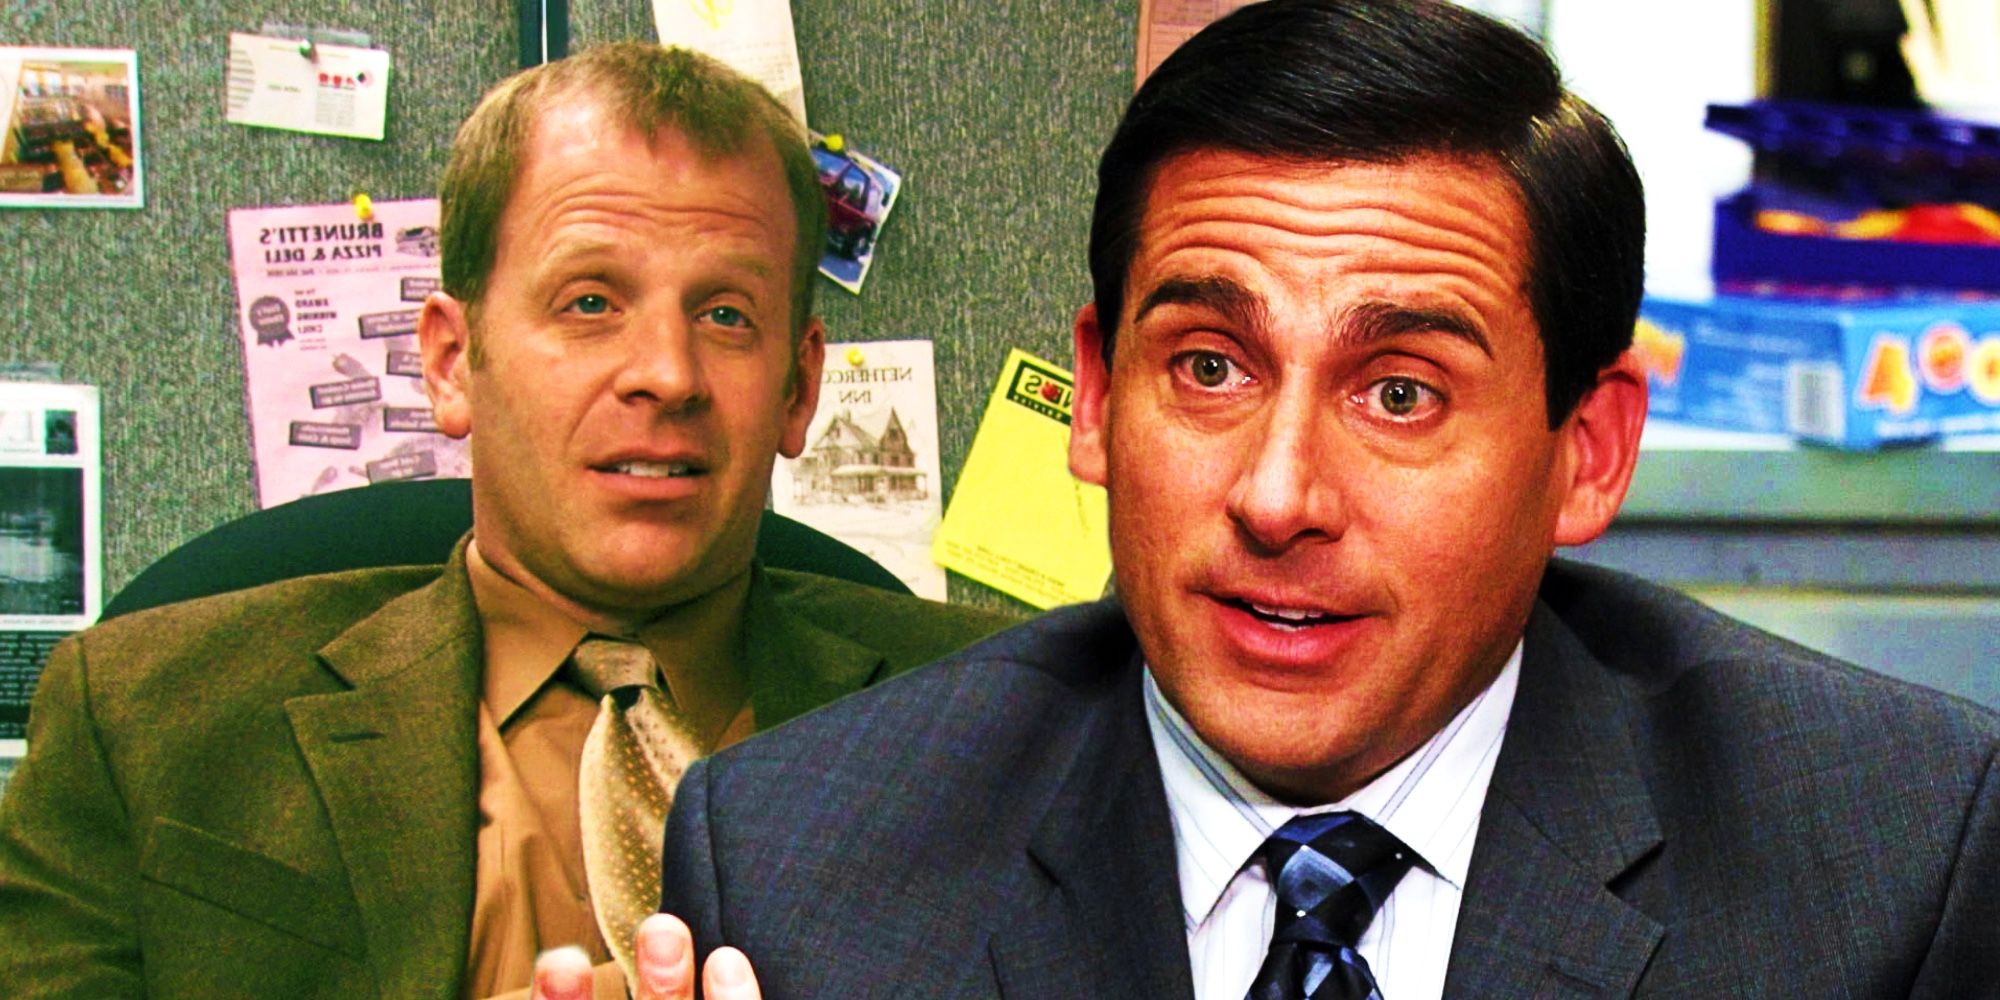 The Toby Theory That Changes Everything On The Office